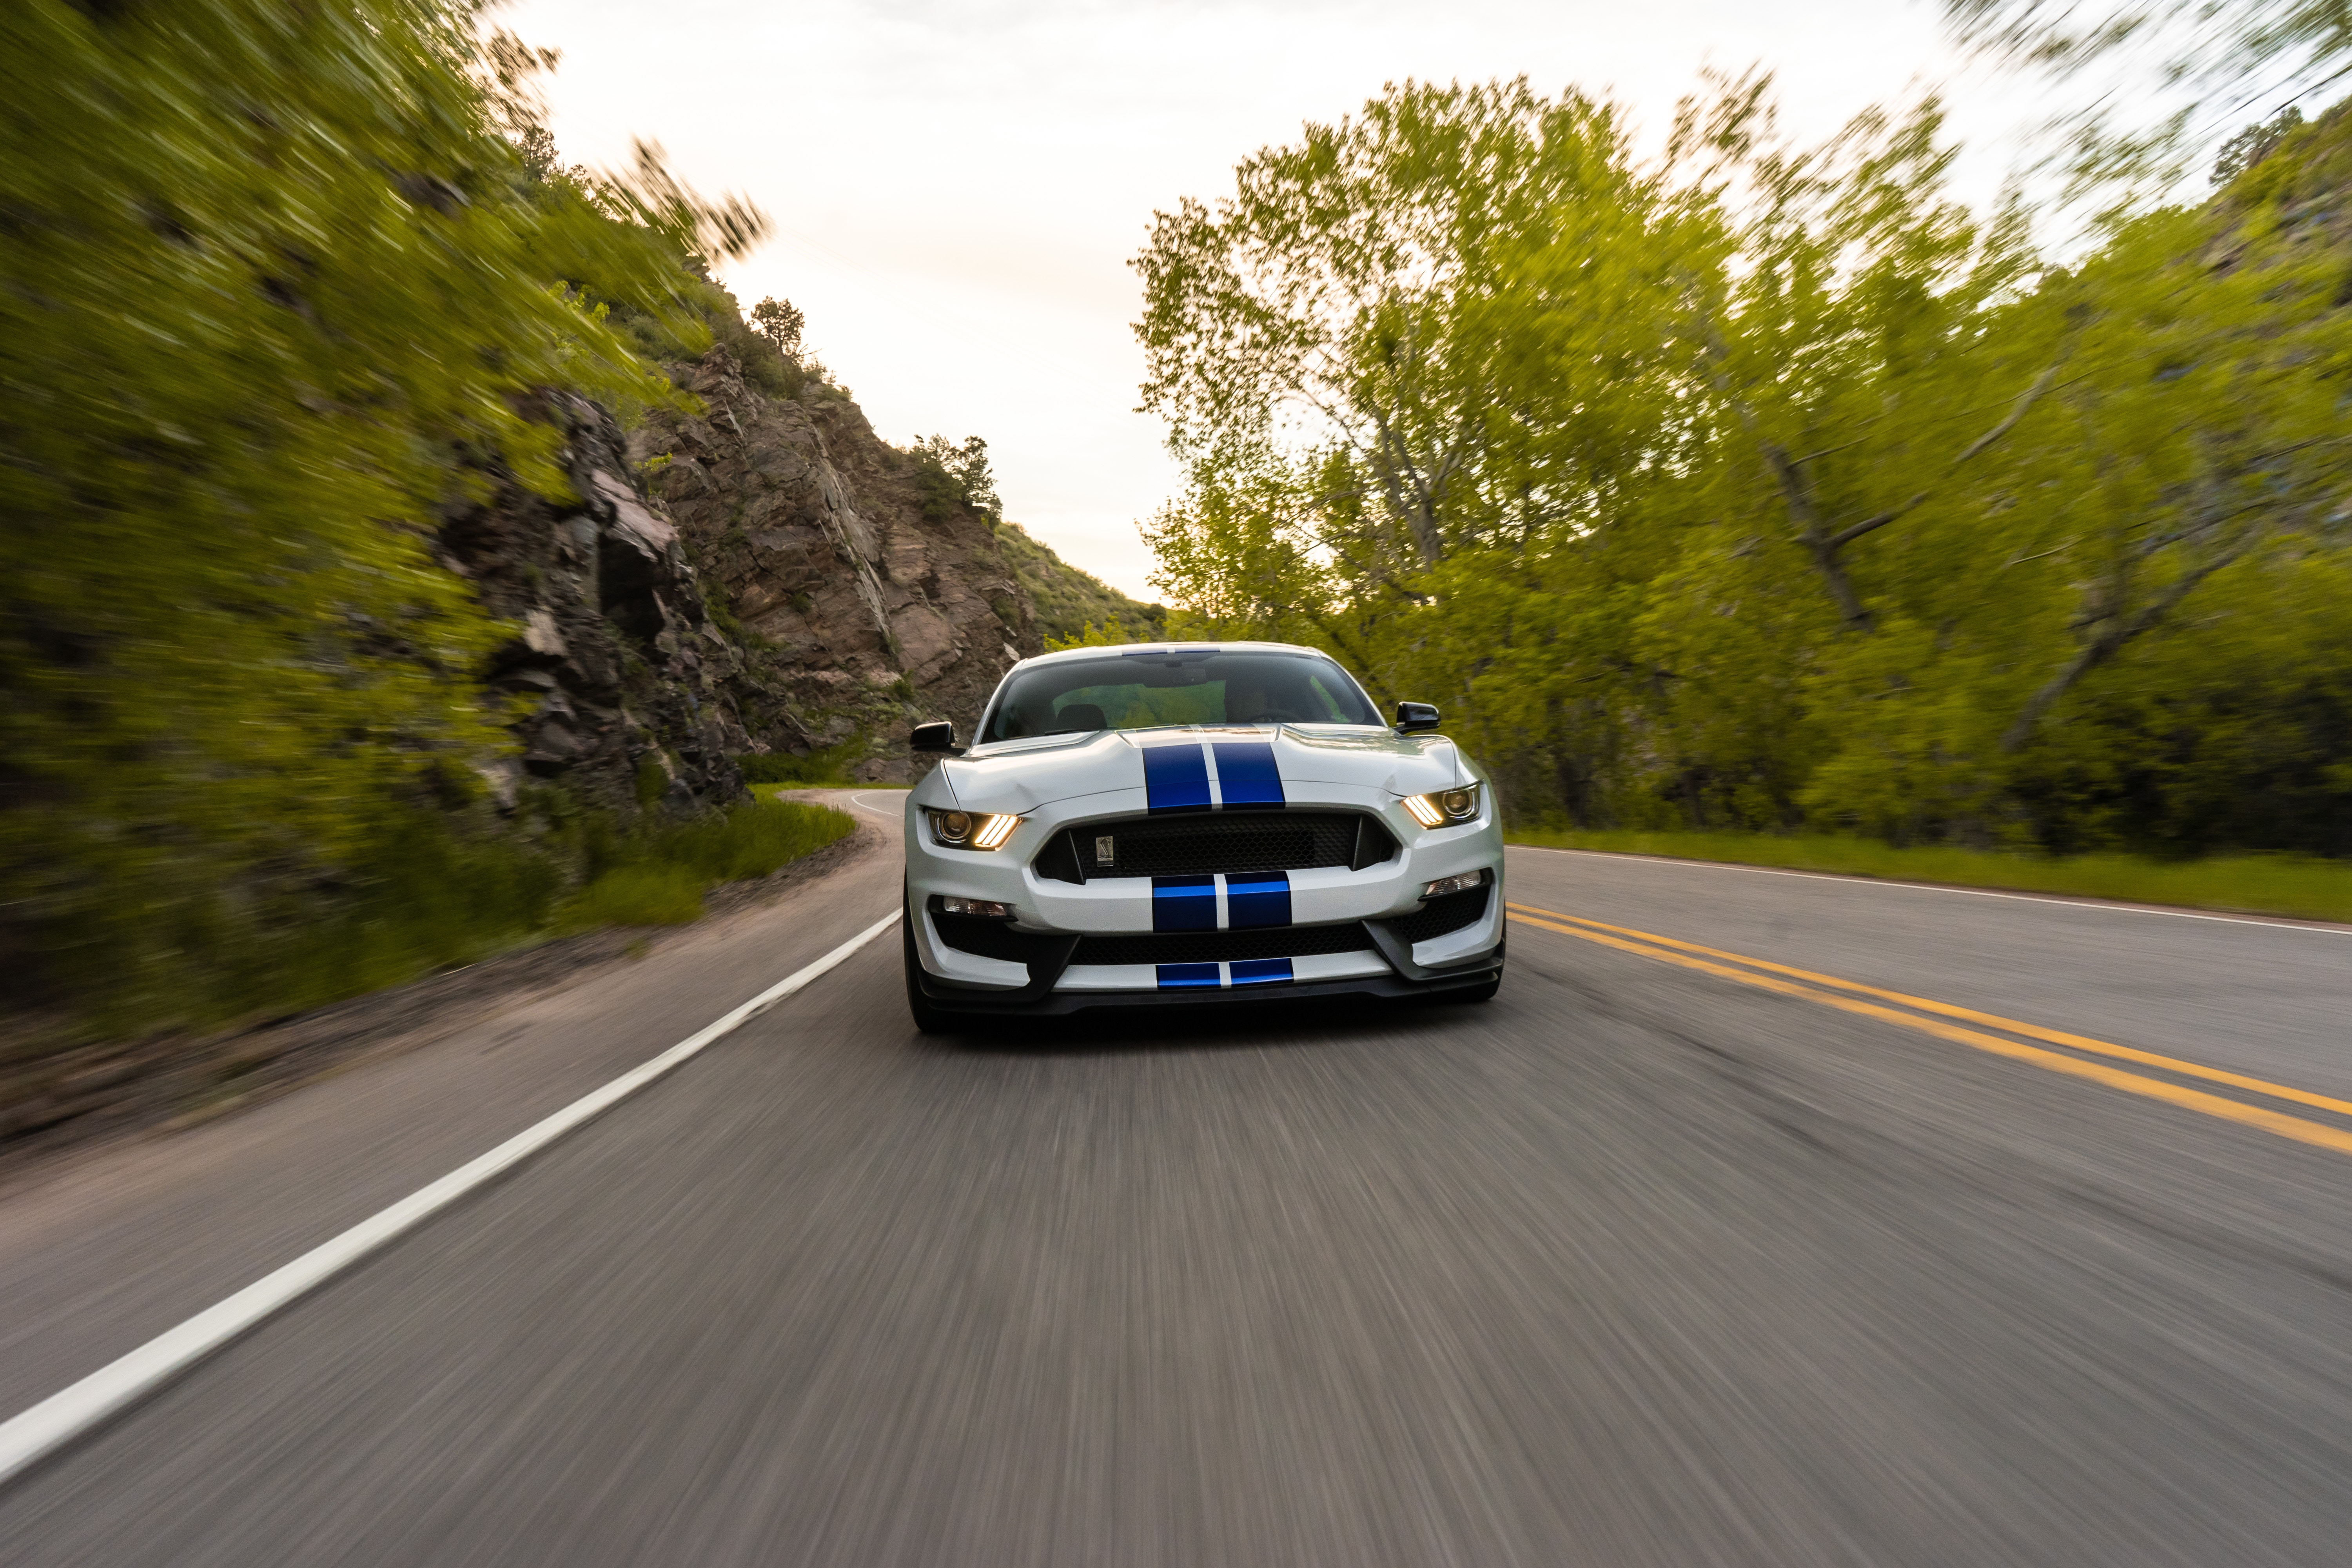 cars, sports car, ford mustang gt350, car, sports, ford, road, machine, speed